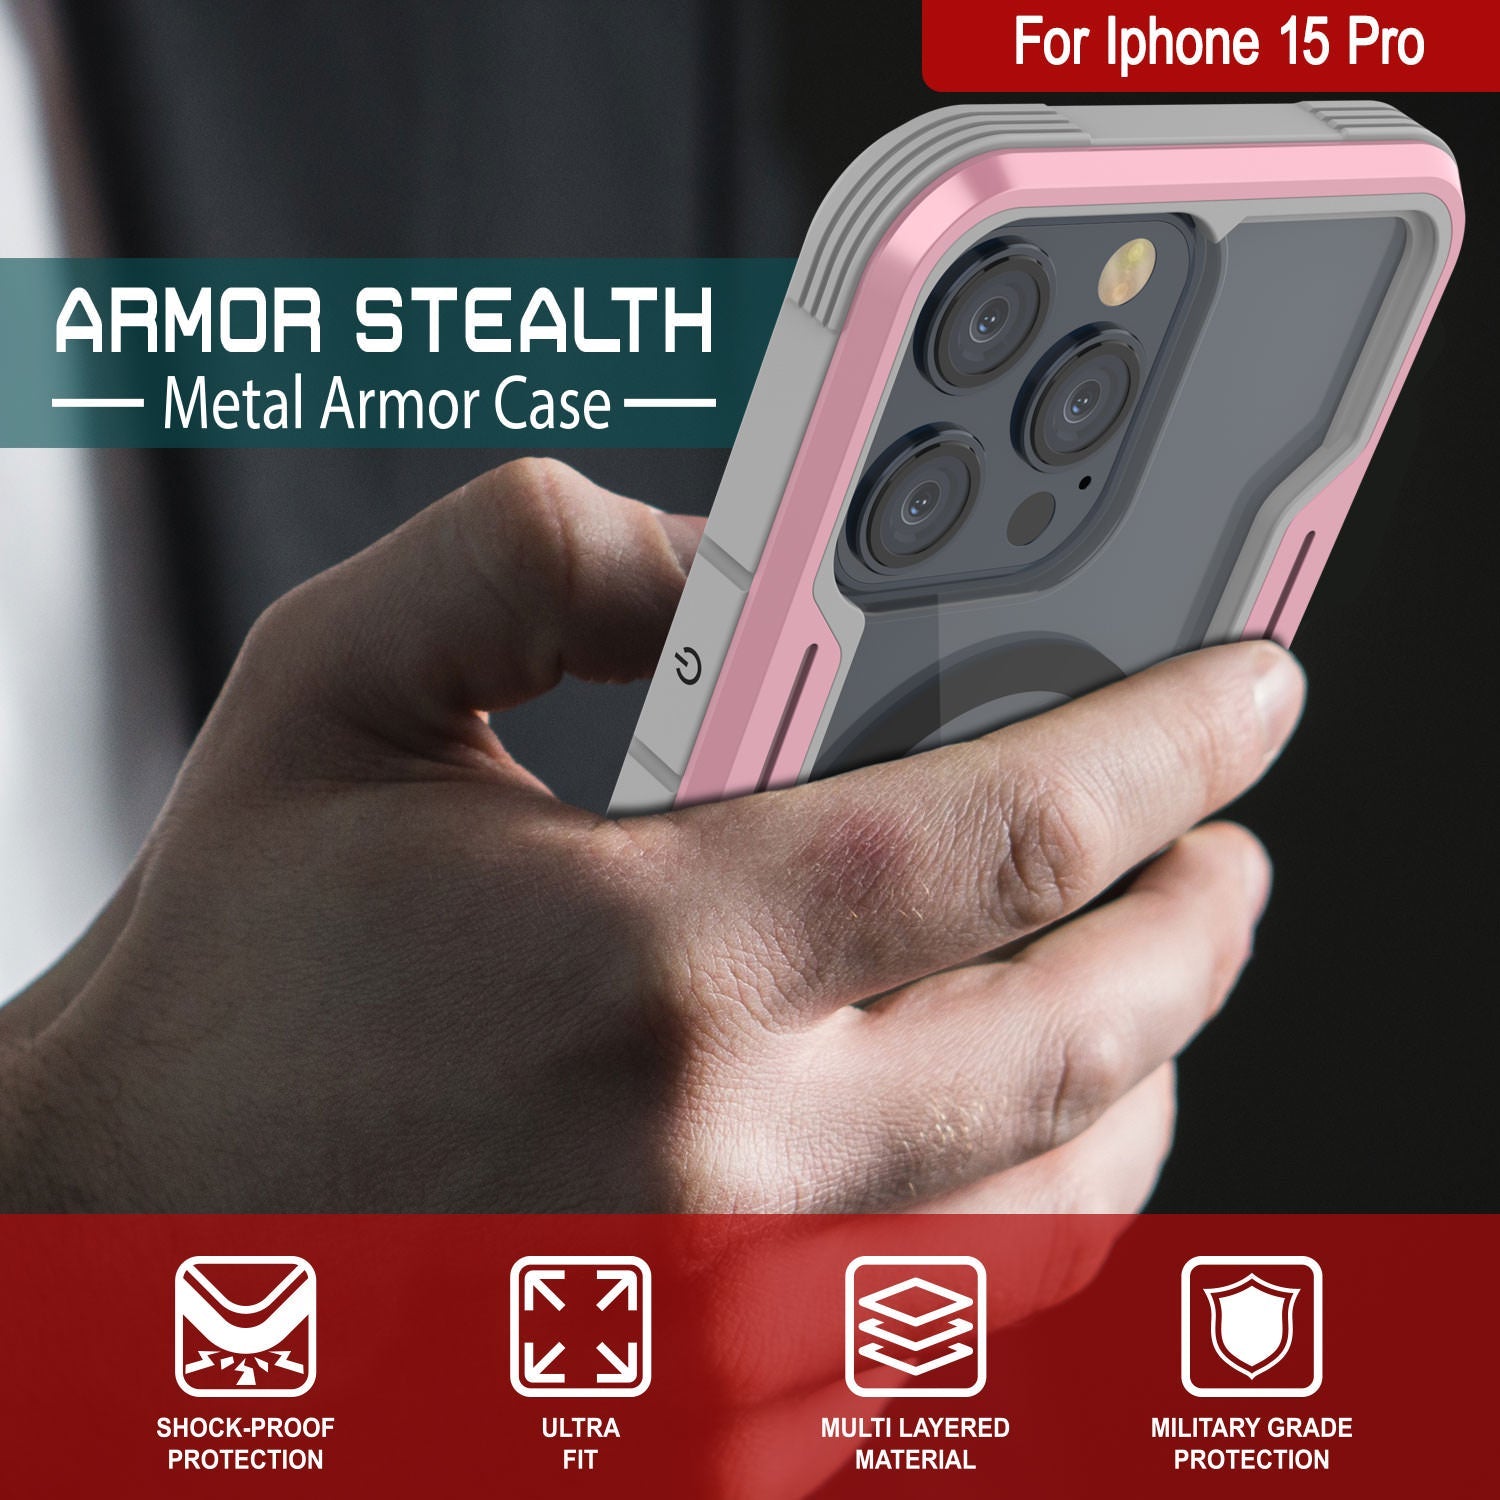 Punkcase iPhone 15 Pro Armor Stealth MAG Defense Case Protective Military Grade Multilayer Cover [Rose-Gold]